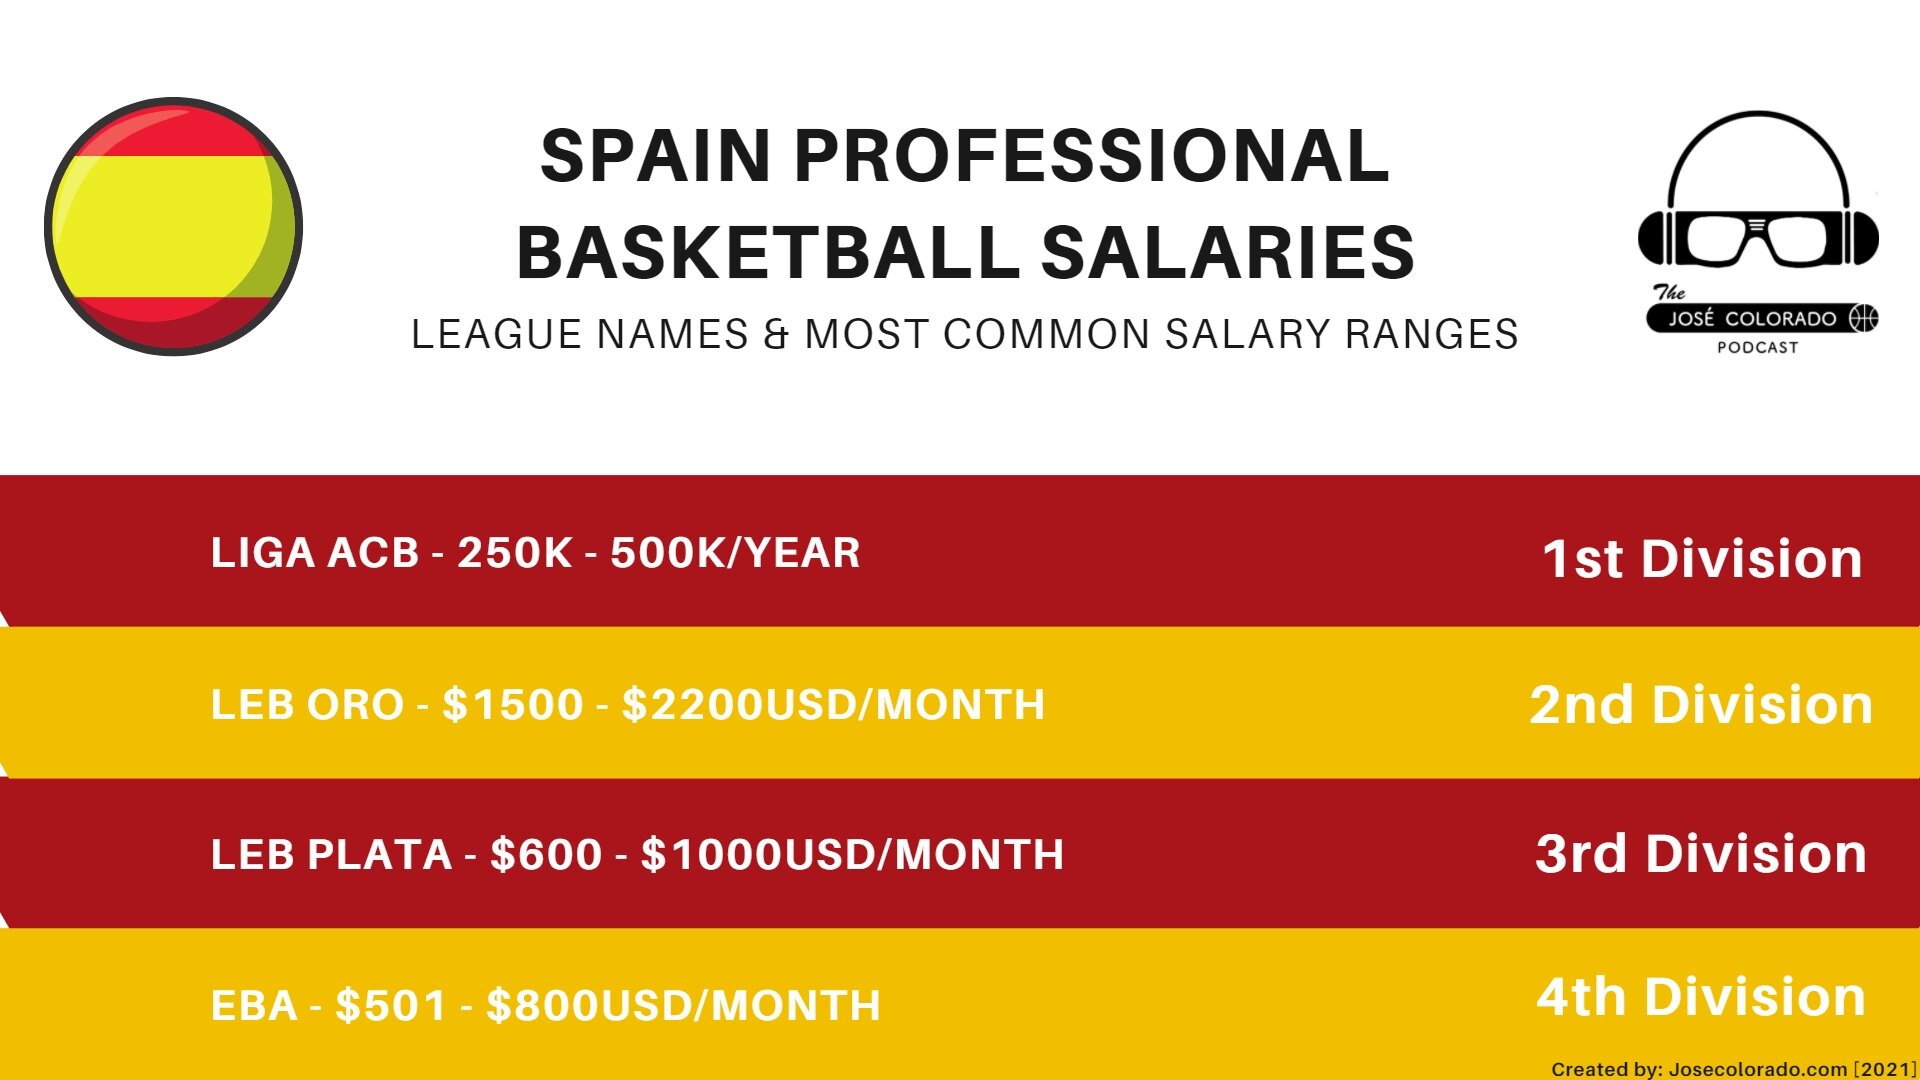 Spain Basketball League salaries increase as players go higher in the leagues.